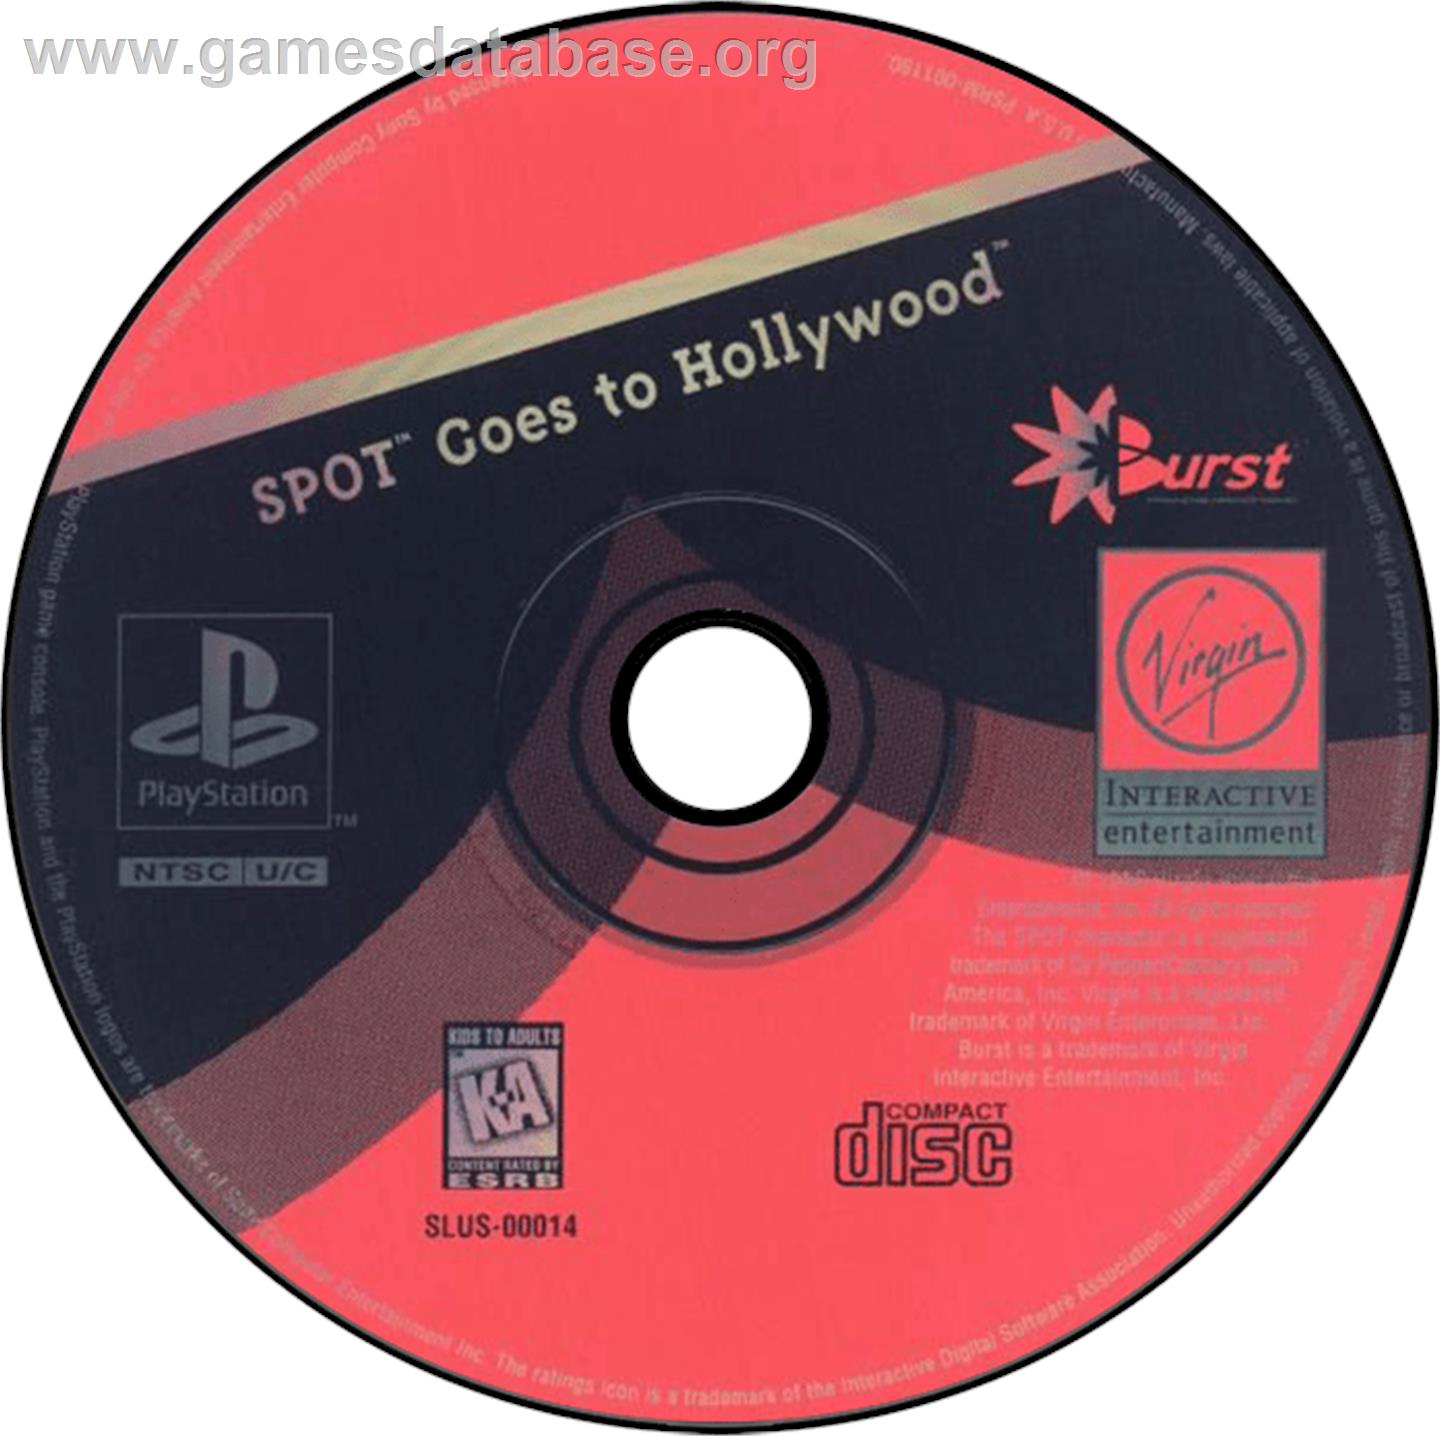 Spot Goes to Hollywood - Sony Playstation - Artwork - Disc